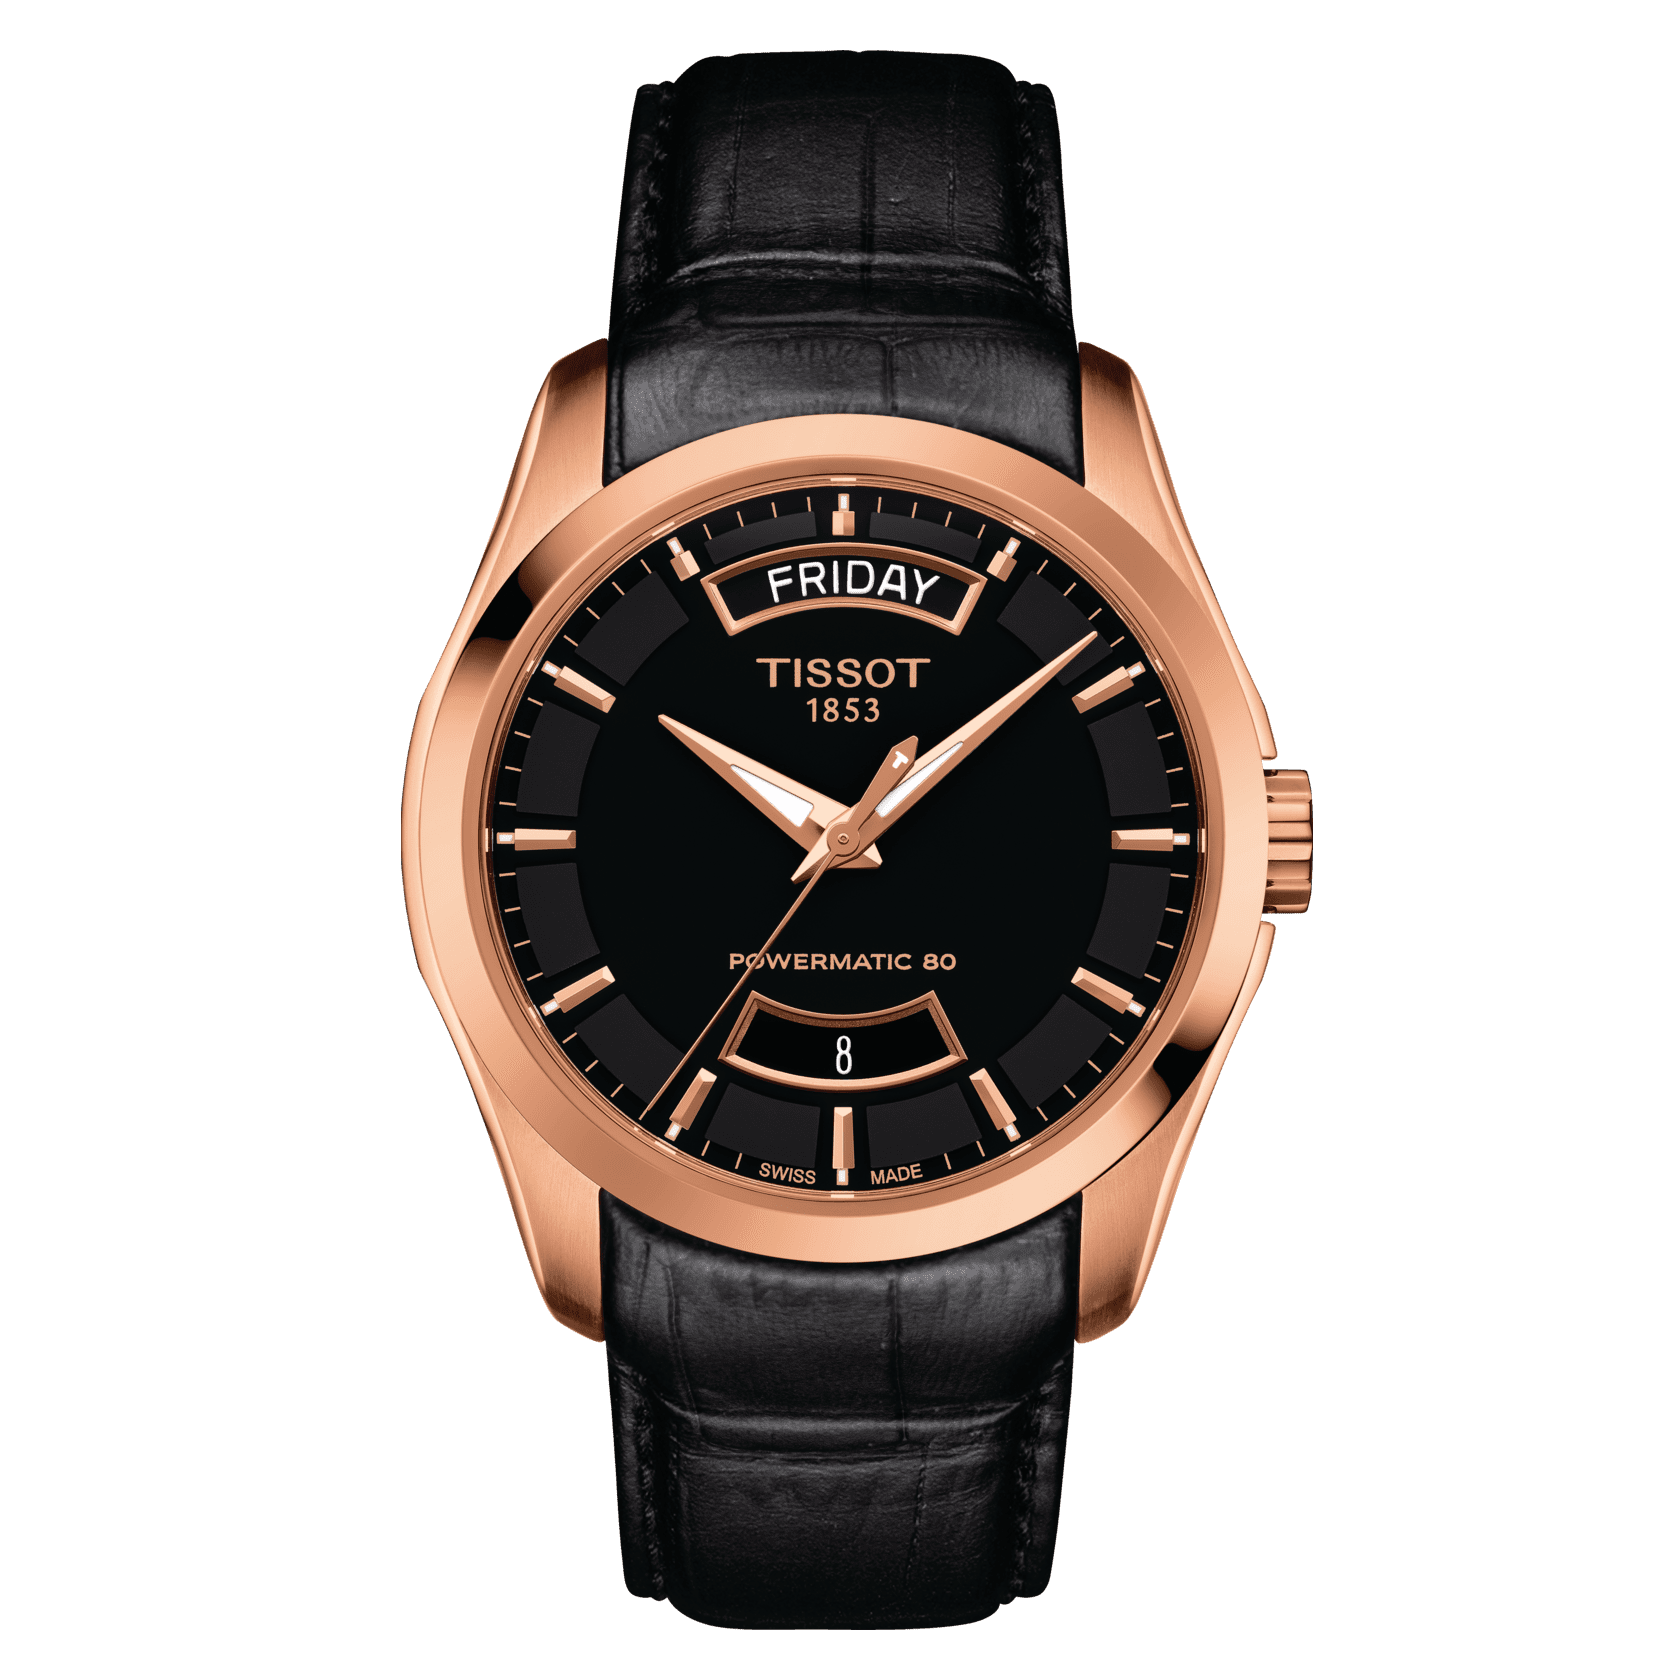 What Is The Best Site To Buy Replica Watches